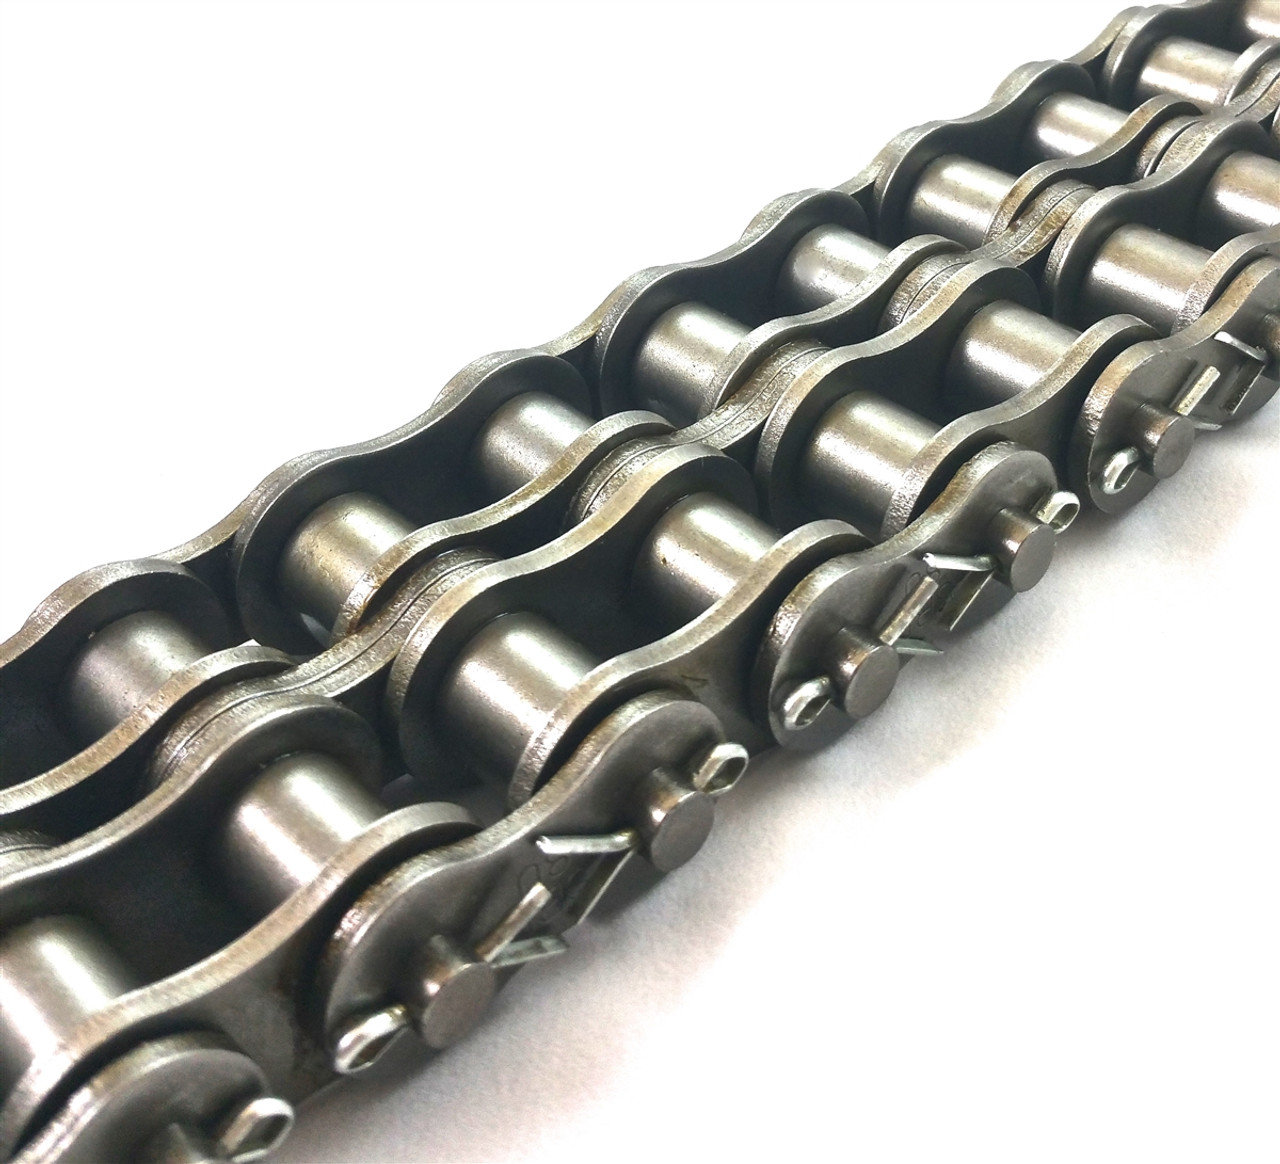 Heavy Cottered Roller Chain w/Hardened Pins - Two Row - 10' Box  DRV-160HZ-2C-10FT